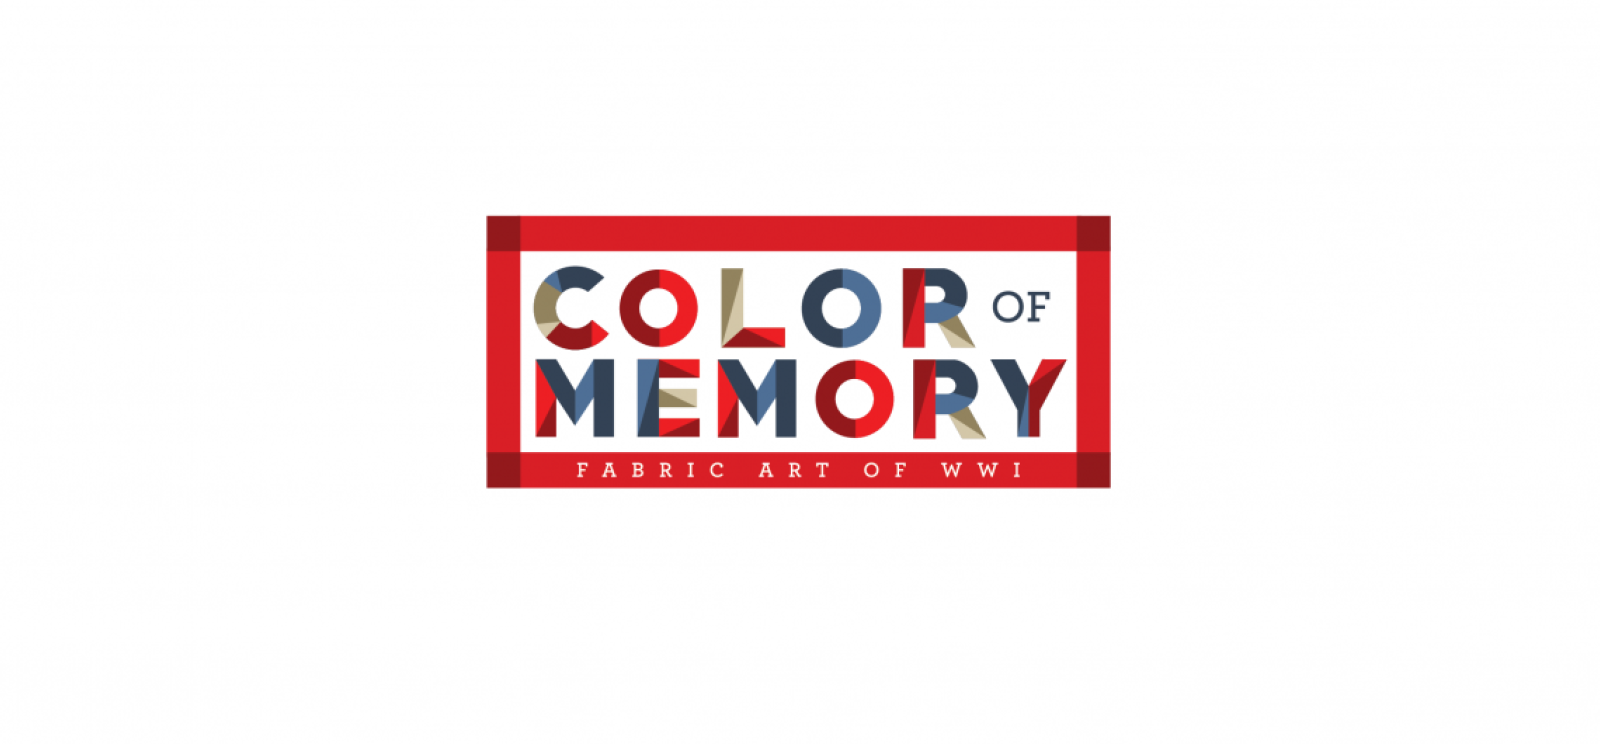 White background. Colorful text: "Color of Memory"